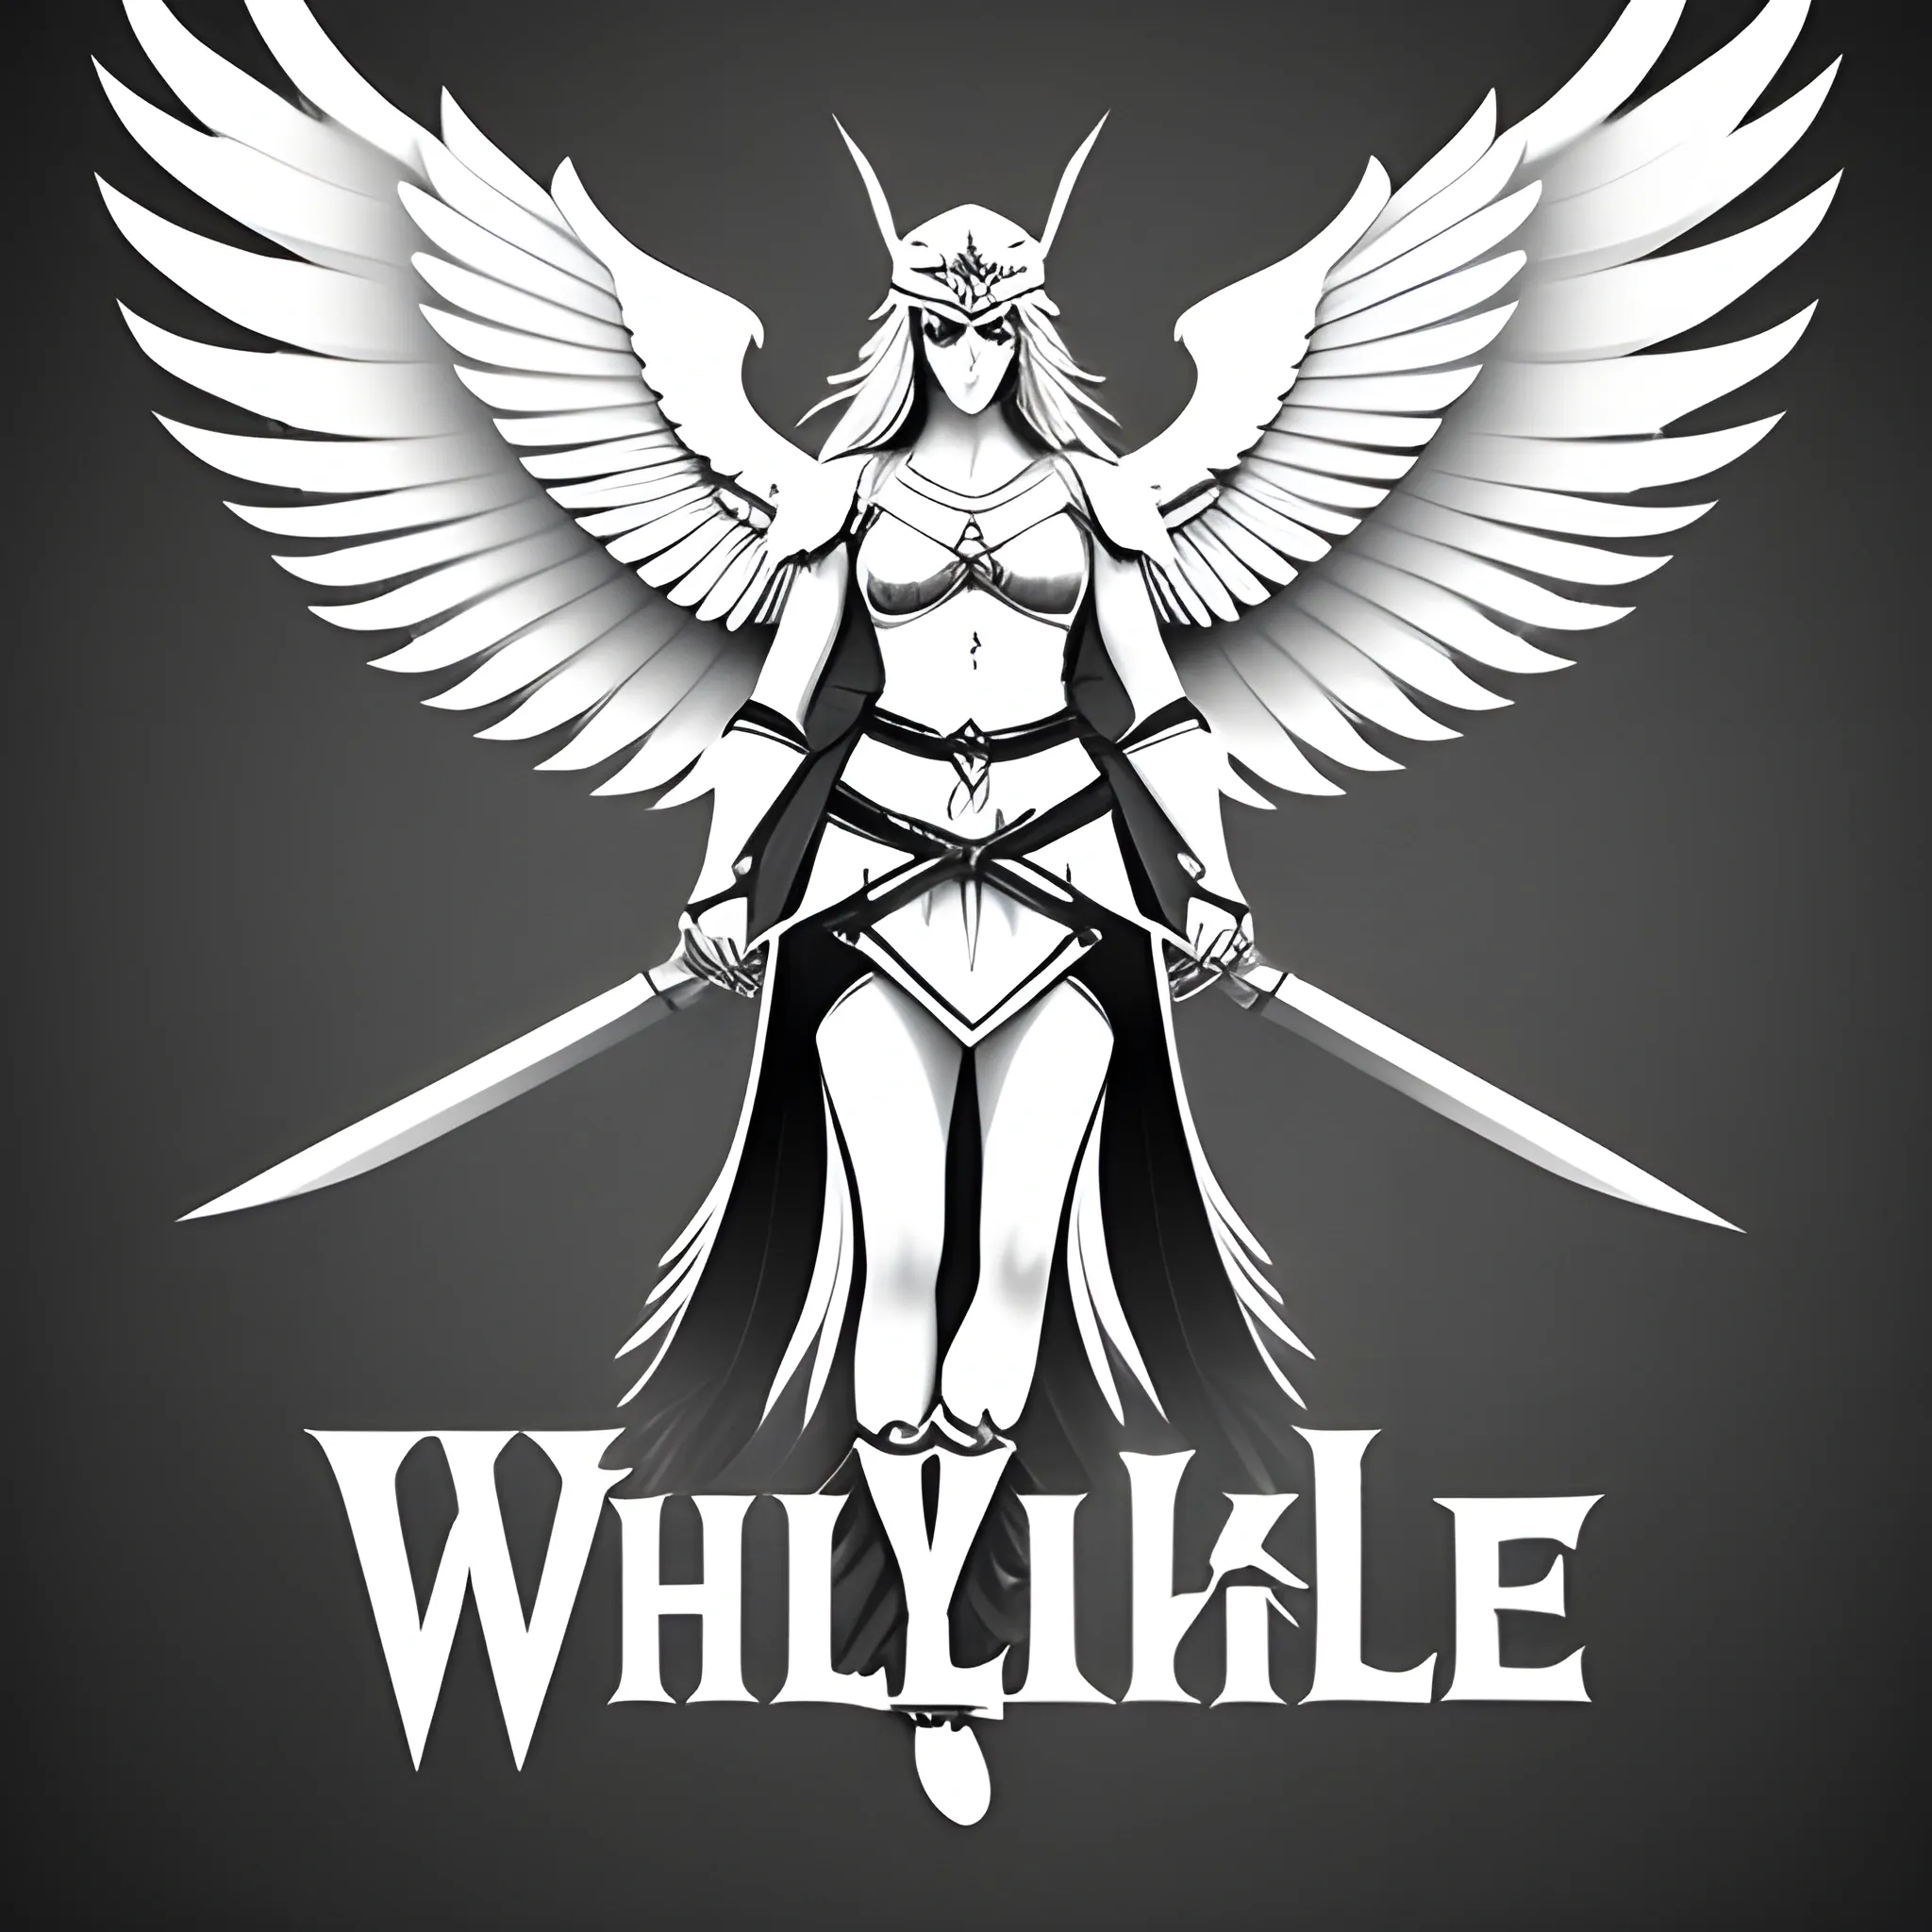 White Valkyrie woman logo, with sword, with wings, Black background